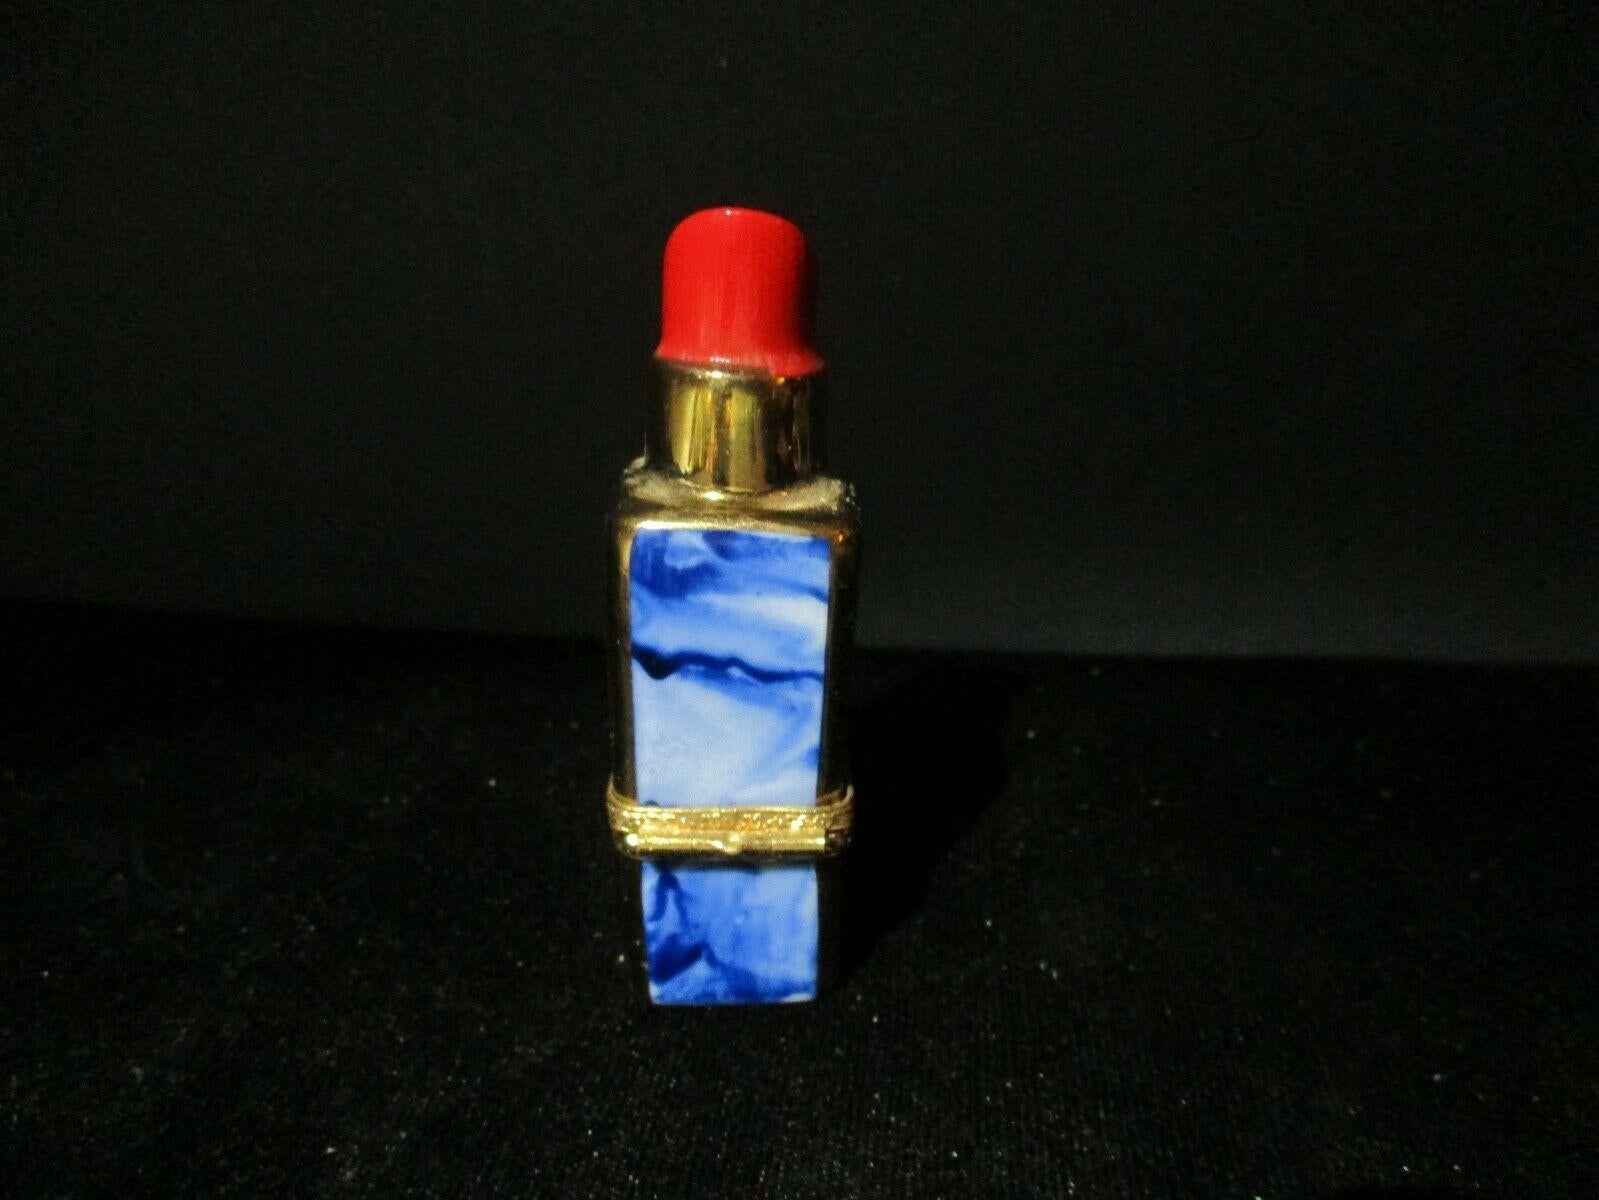 Rare Limoges France Rochard Peint main trinket box crimson lipstick in blue marbled case with brass accent. Marked as shown. The hinged lidded trinket box measures 1.25 inches tall, and 2 inches in diameter. Signed/ marked.